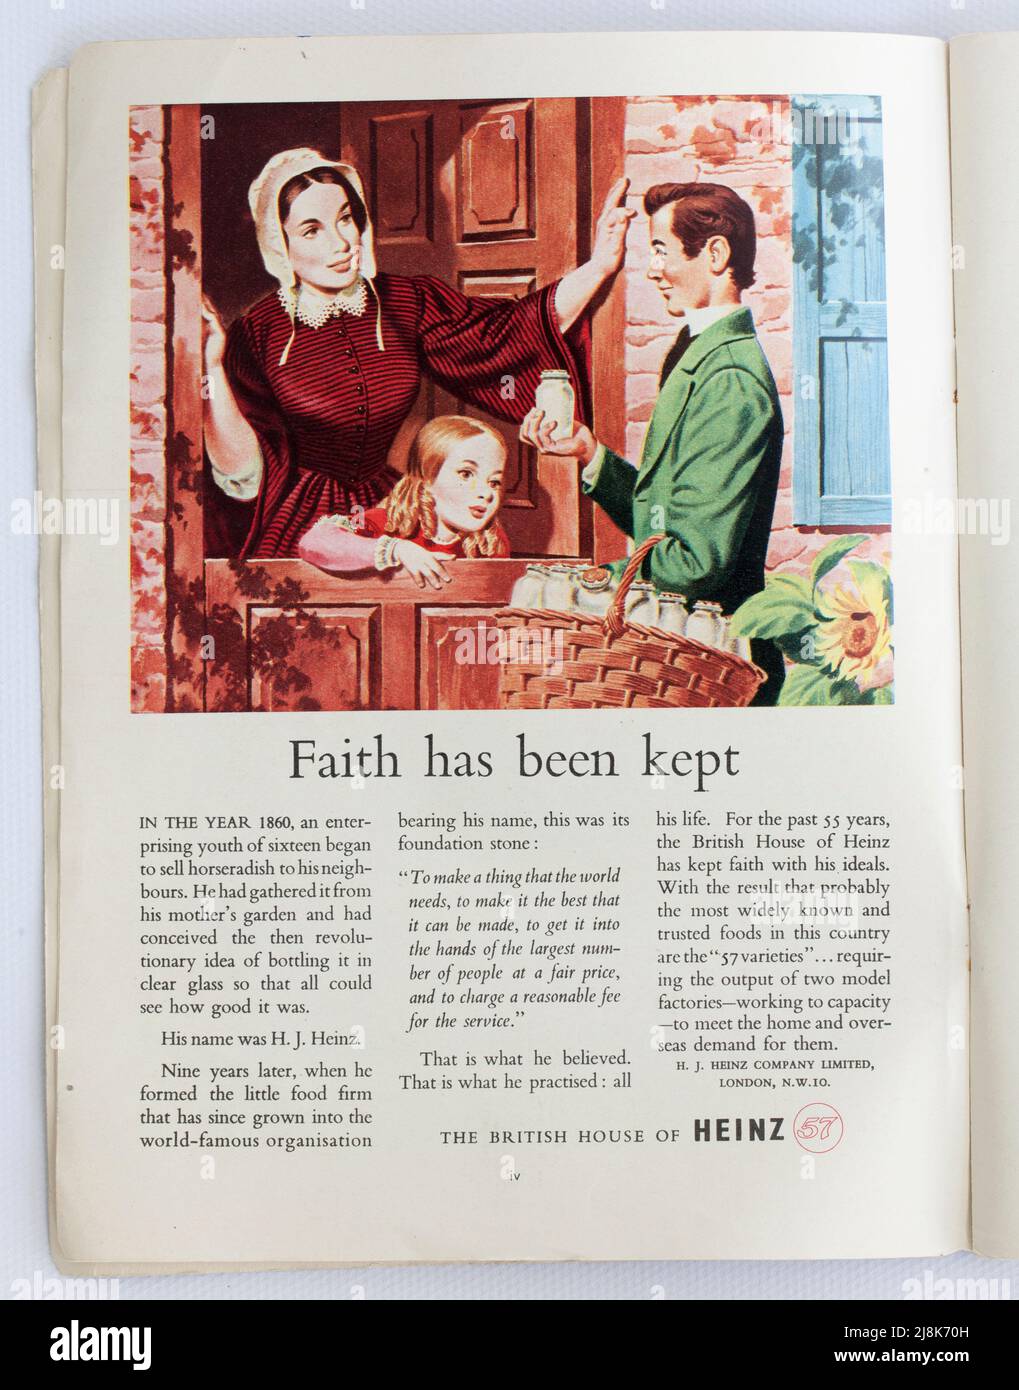 Old 1950s British Advertising for Heinz Foods Banque D'Images